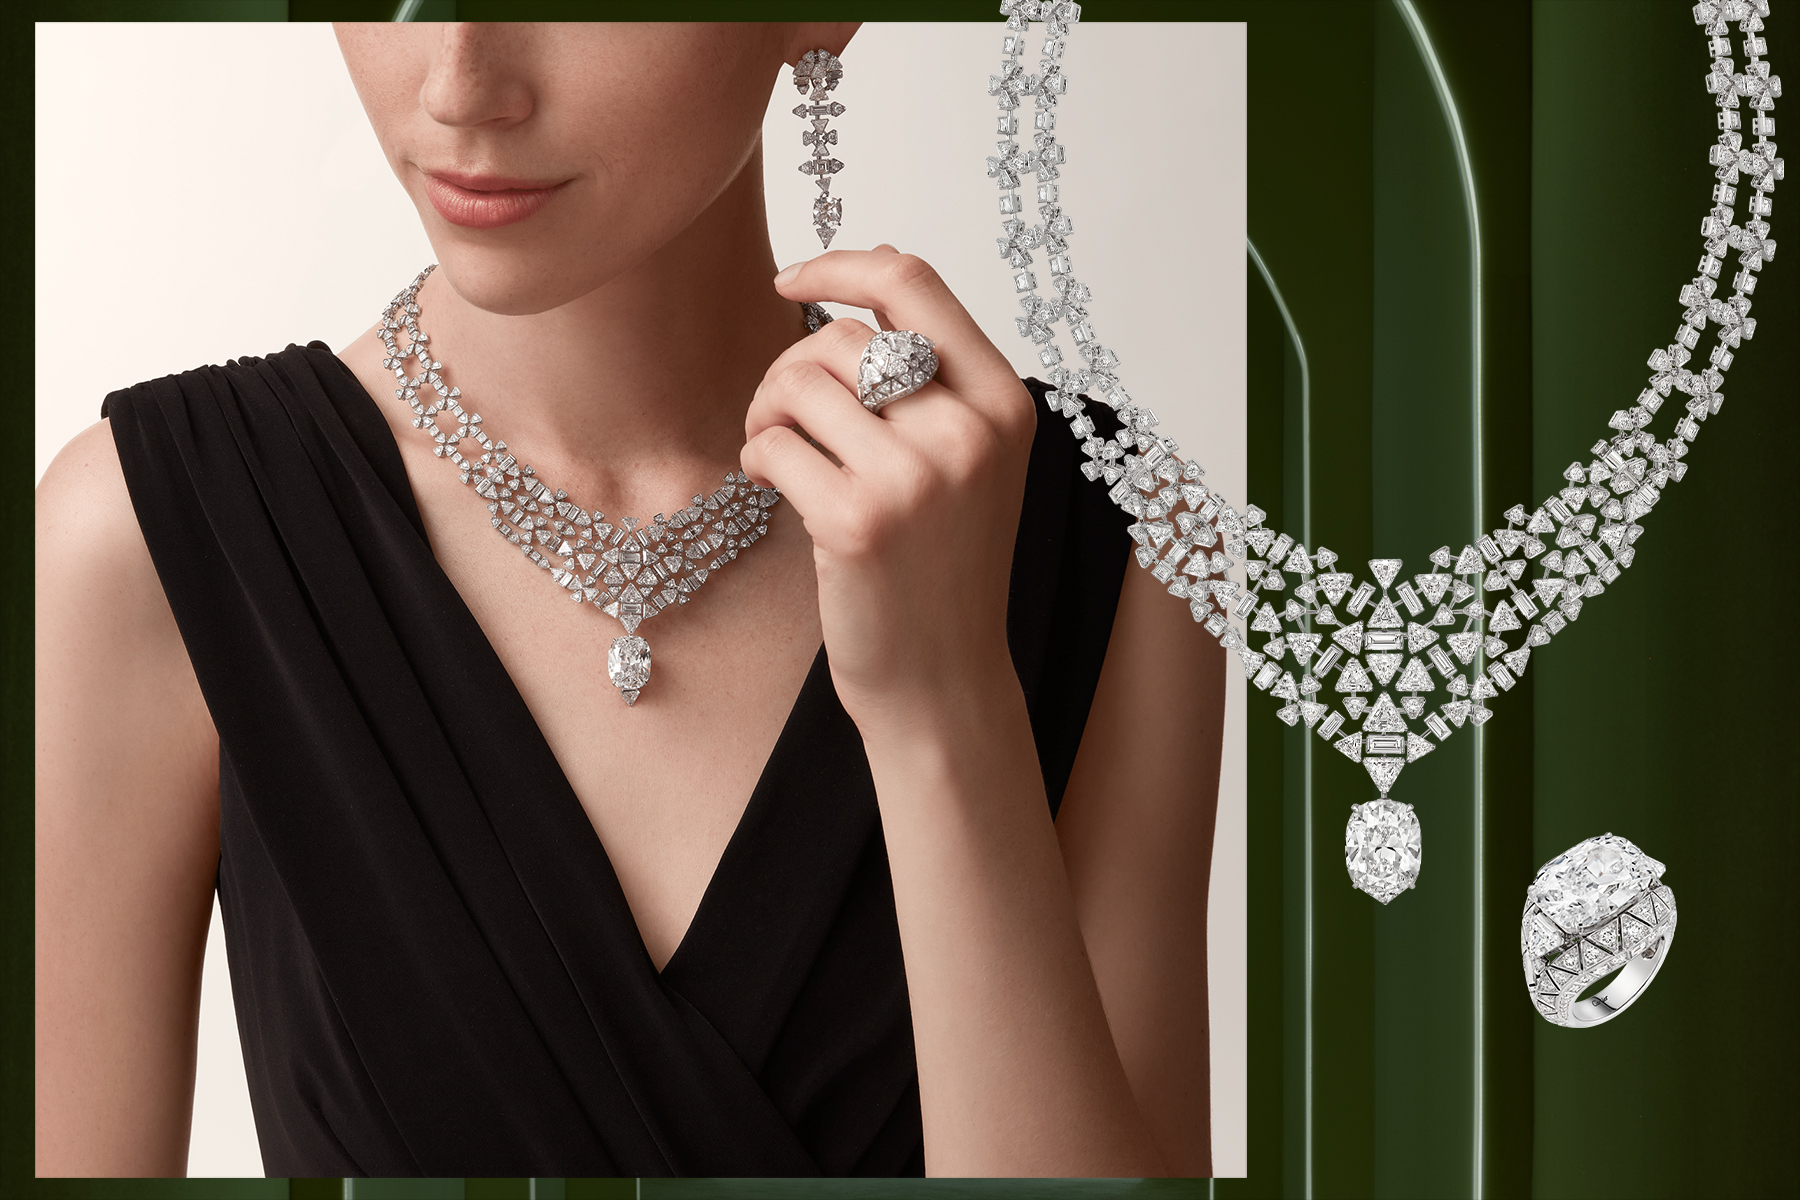 CARTIER REVEALS THE NEW HIGH JEWELLERY COLLECTION BEAUTÉS DU MONDE IN  MADRID ON 13TH JUNE